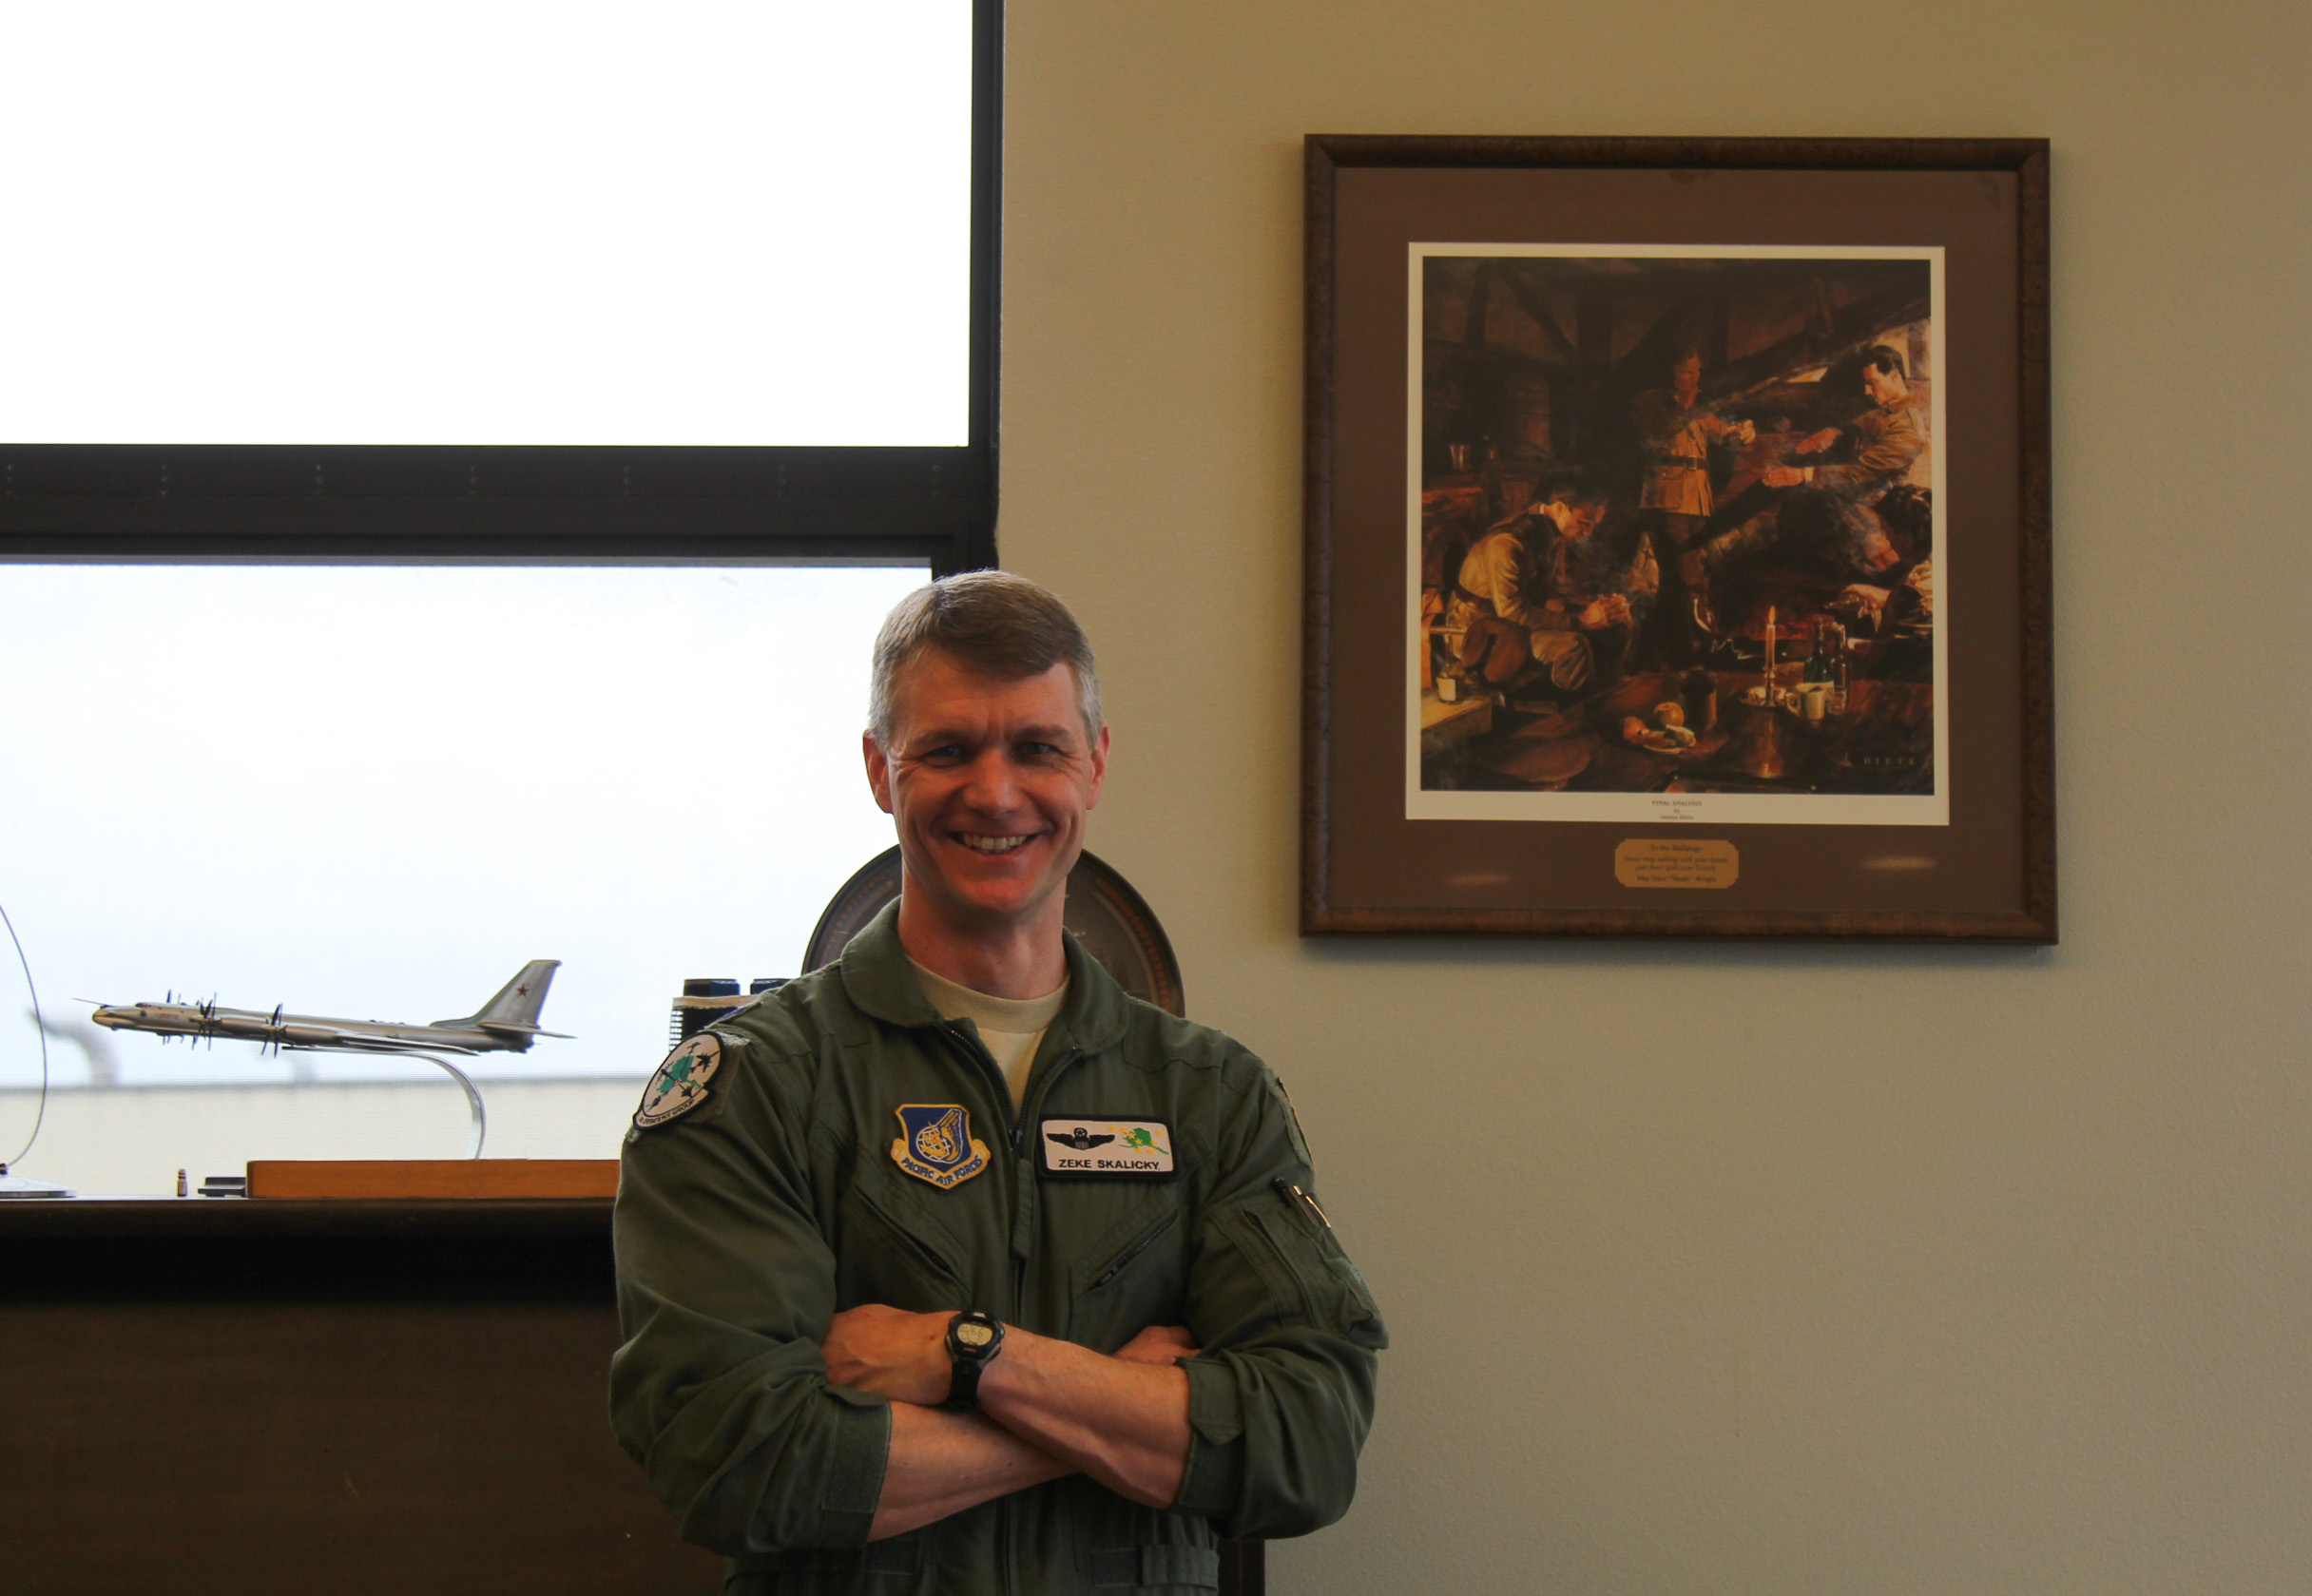 Lt. Col. Dave Skalicky at the 90th Fighter Squadron’s heritage room at Joing Base Elmendorf-Richardson. (Photo by Zachariah Hughes/Alaska Public Media)